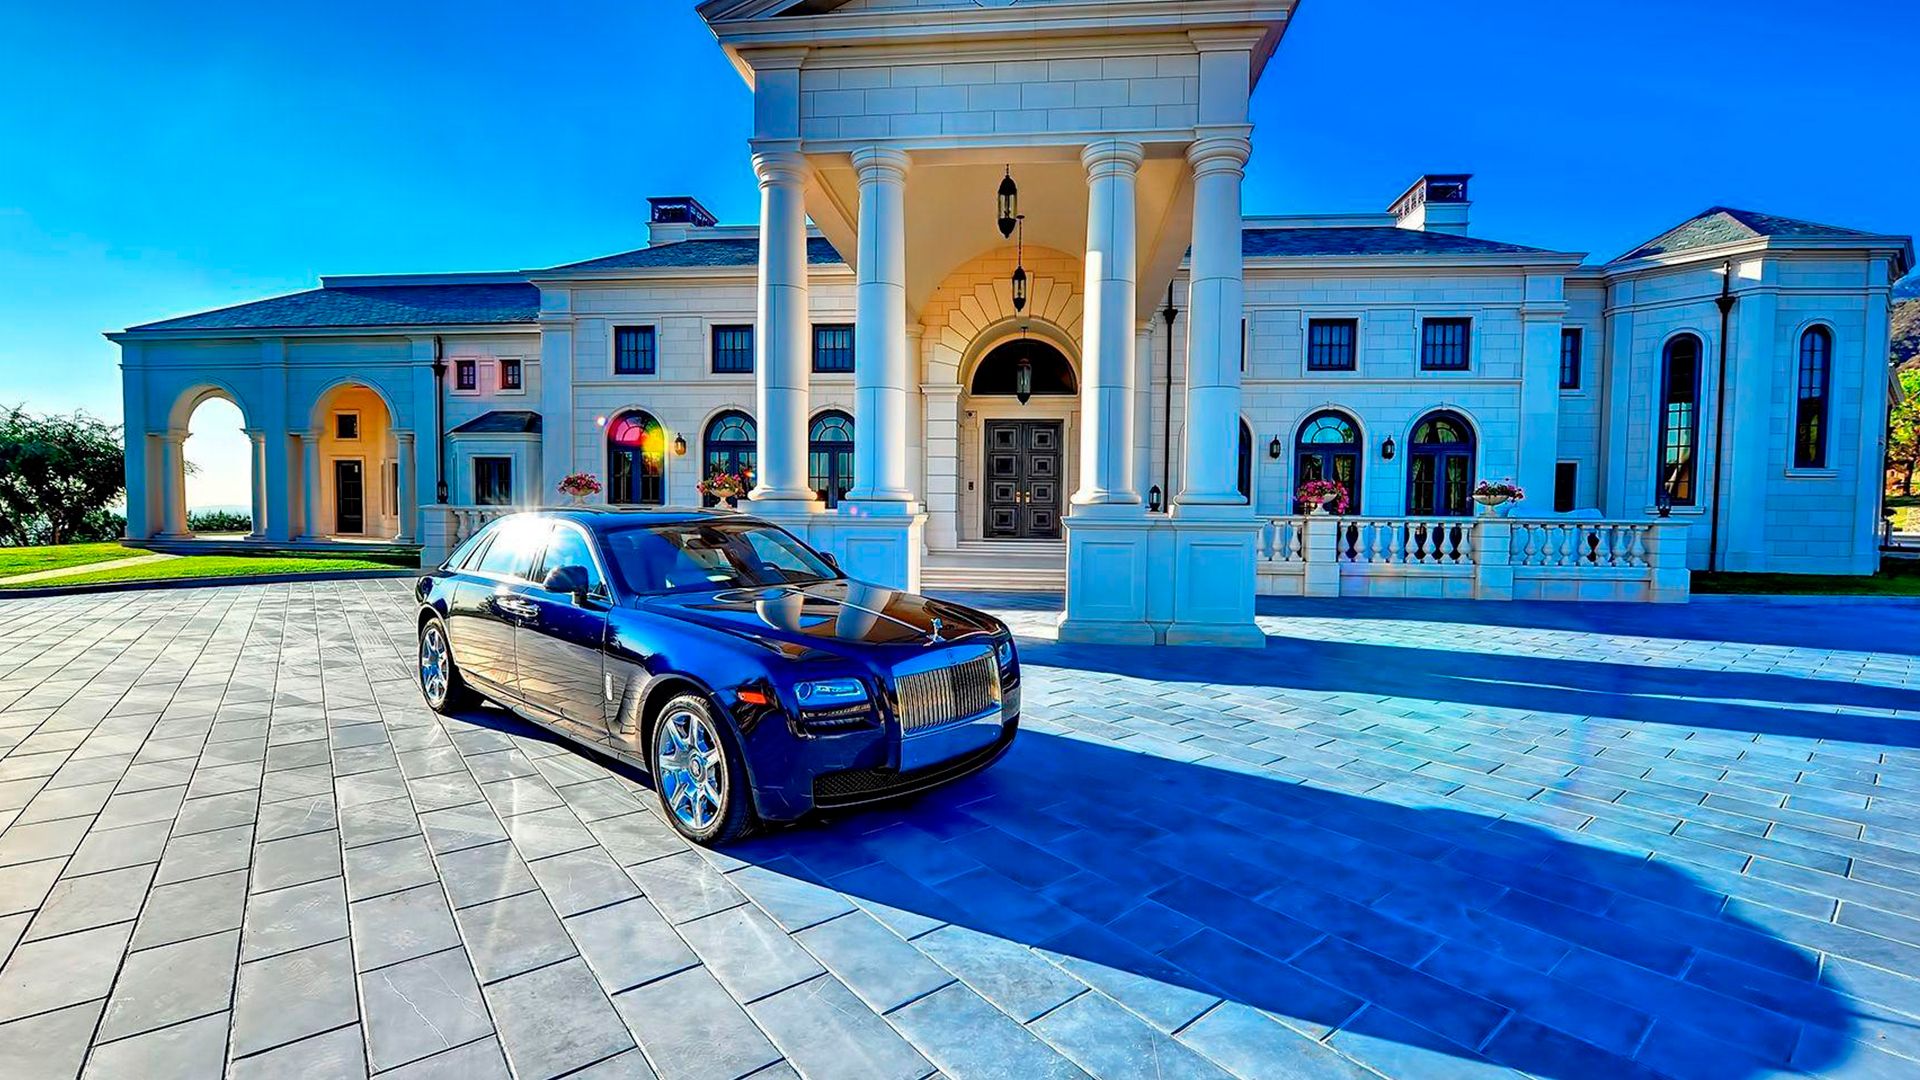 Luxury home and car wallpaper